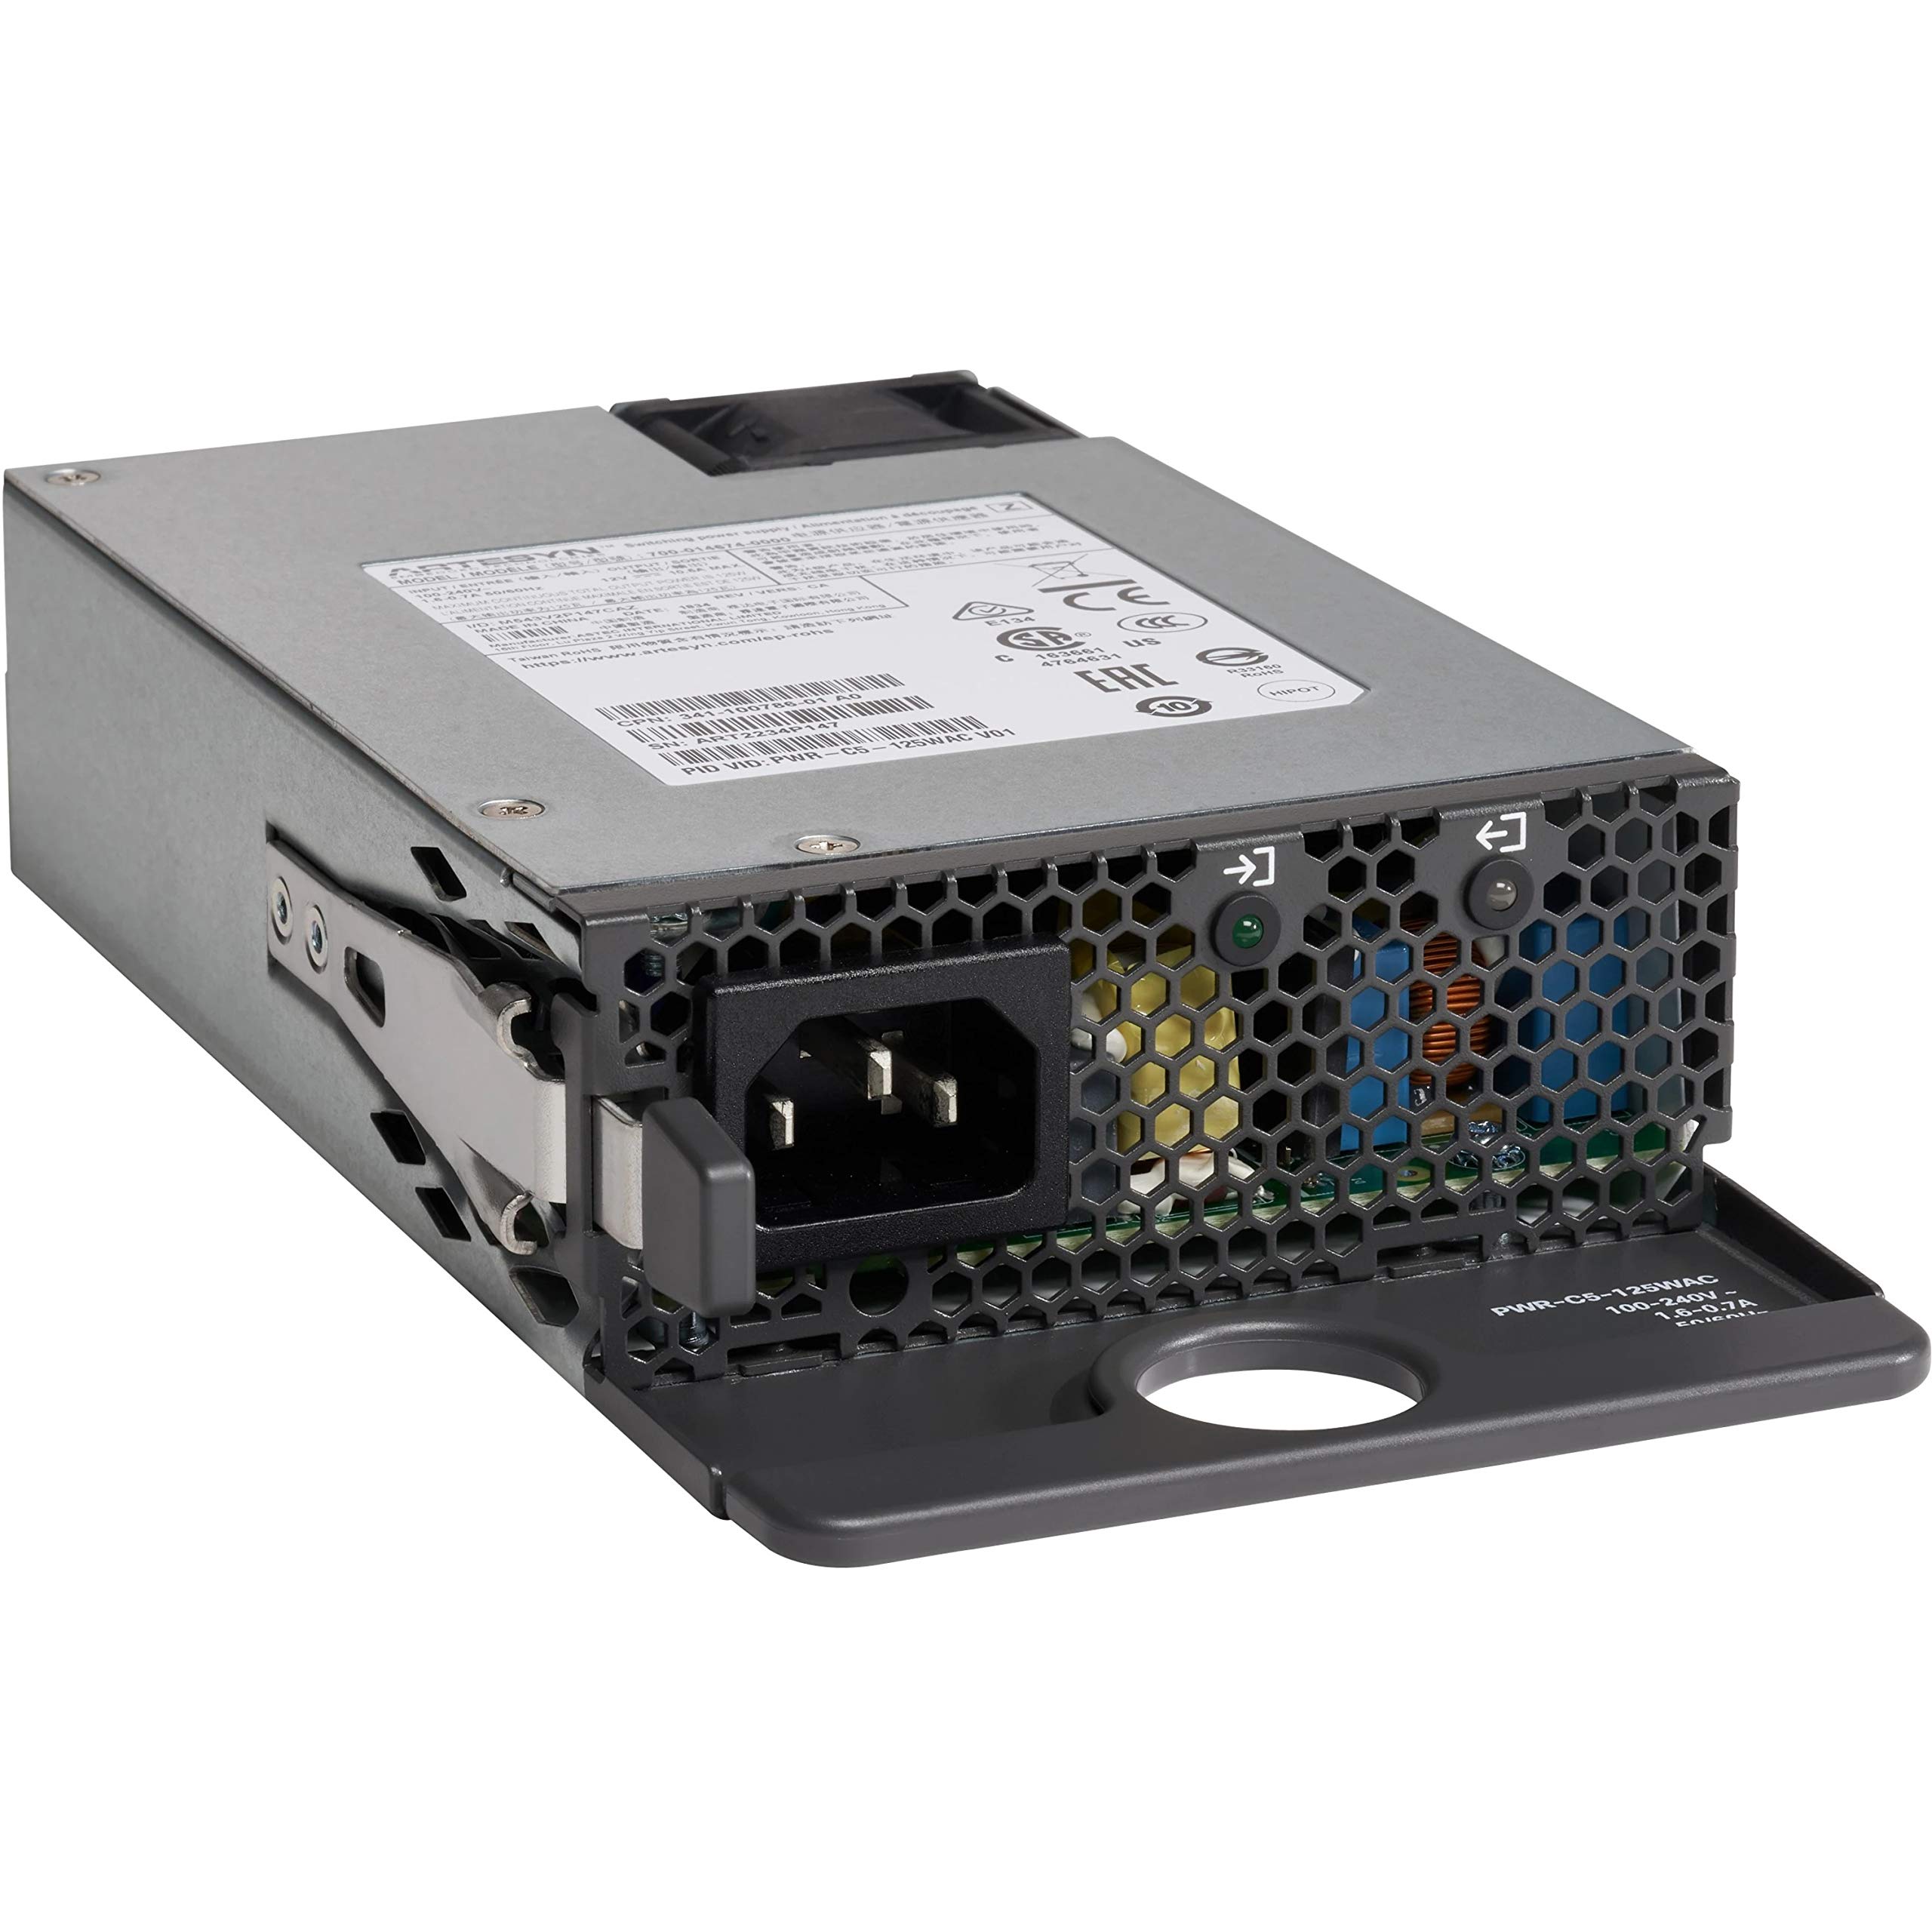 1KW AC CONFIG 6 POWER SUPPLY